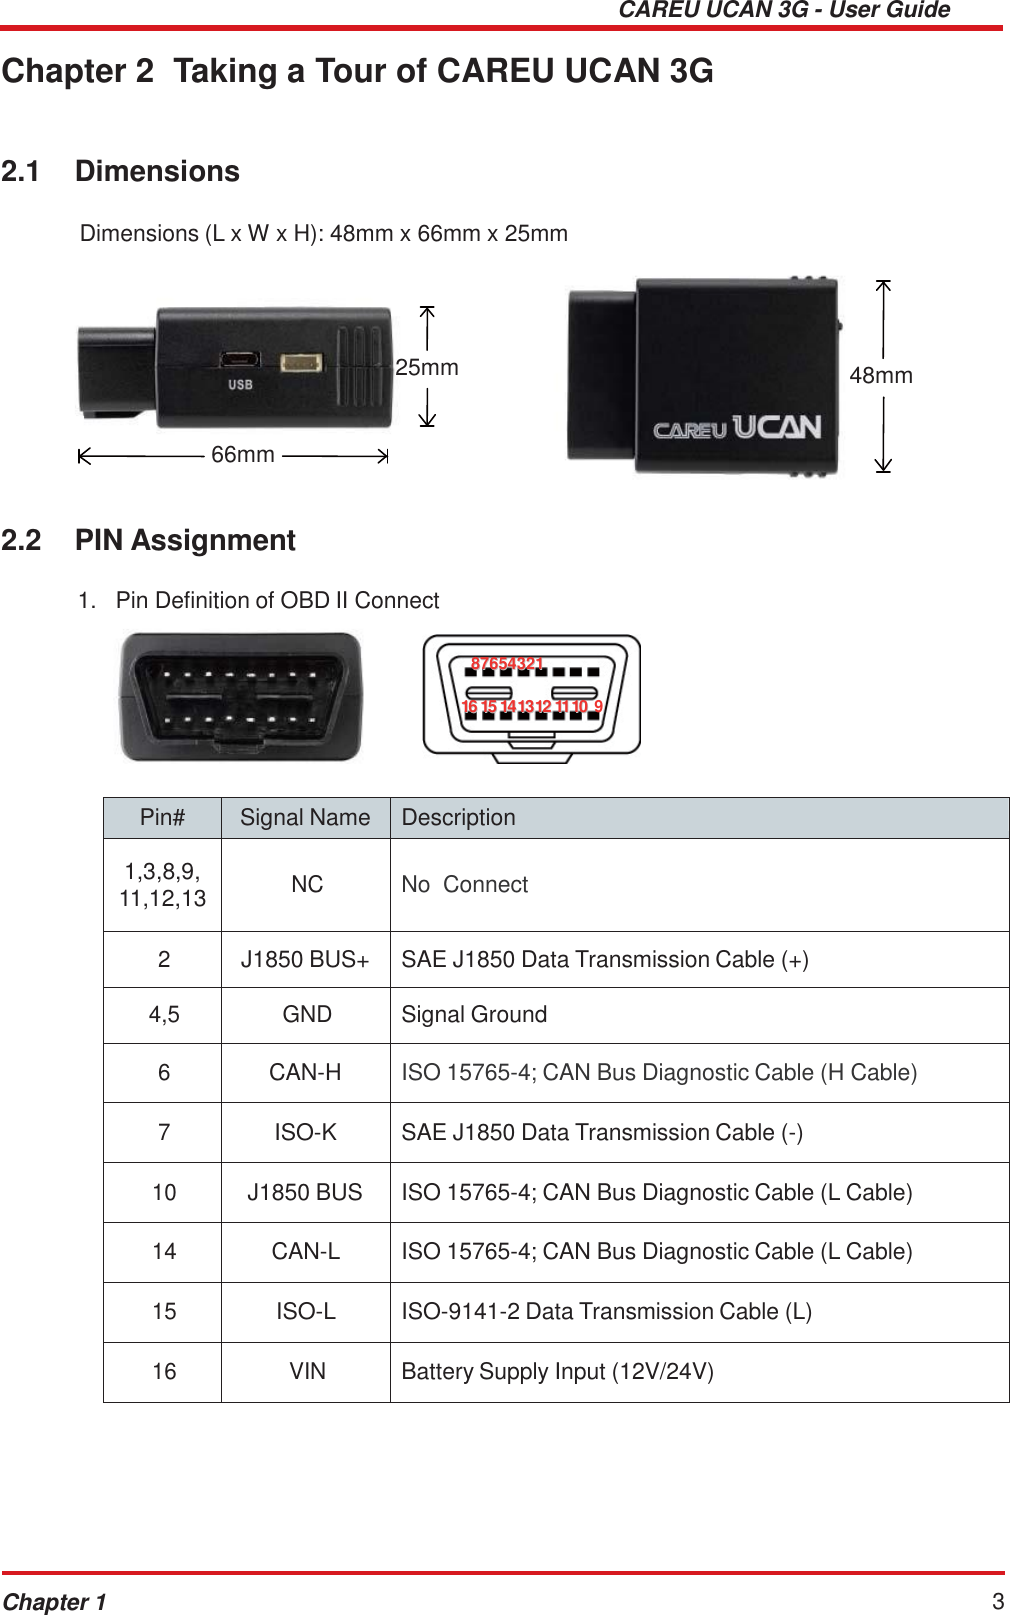 CAREU UCAN 3G - User Guide Chapter 1 3    Chapter 2  Taking a Tour of CAREU UCAN 3G    2.1  Dimensions   Dimensions (L x W x H): 48mm x 66mm x 25mm      25mm  48mm    66mm    2.2  PIN Assignment  1.   Pin Definition of OBD II Connect   8877665544332211  1166 1155 114411331122 11111100 9     Pin# Signal Name Description  1,3,8,9, 11,12,13   NC   No  Connect  2  J1850 BUS+  SAE J1850 Data Transmission Cable (+)  4,5  GND  Signal Ground  6  CAN-H  ISO 15765-4; CAN Bus Diagnostic Cable (H Cable)  7  ISO-K  SAE J1850 Data Transmission Cable (-)  10  J1850 BUS  ISO 15765-4; CAN Bus Diagnostic Cable (L Cable)  14  CAN-L  ISO 15765-4; CAN Bus Diagnostic Cable (L Cable)  15  ISO-L  ISO-9141-2 Data Transmission Cable (L)  16  VIN  Battery Supply Input (12V/24V) 